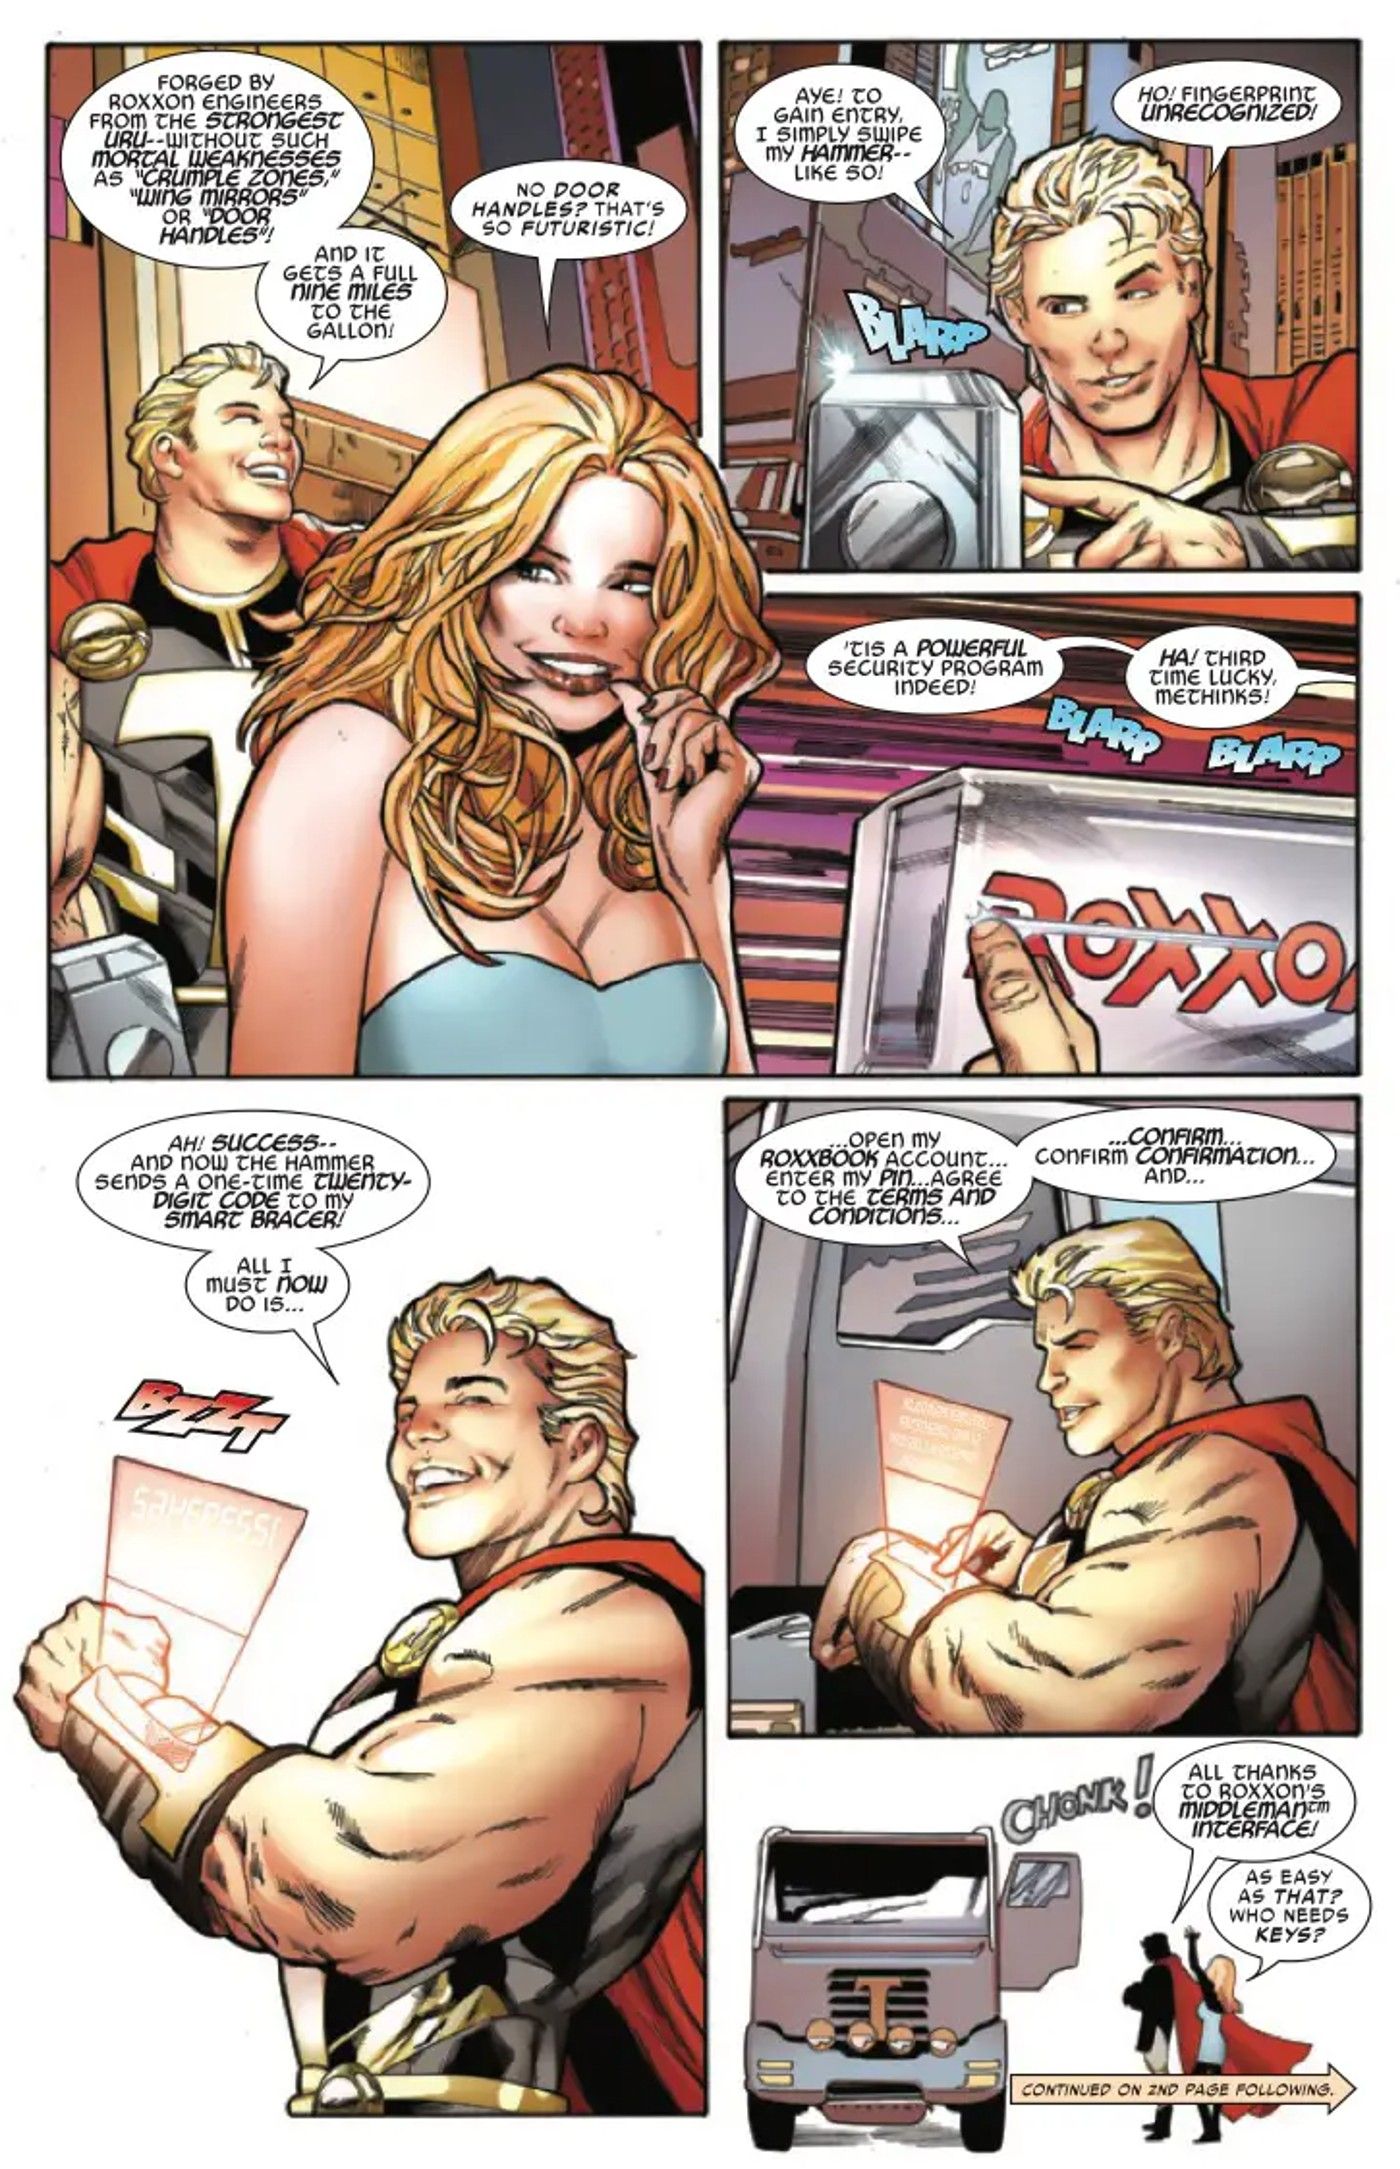 roxxon presents thor 1 preview, page 4, chad hammer thor reveals his new mjolnir hammer 2